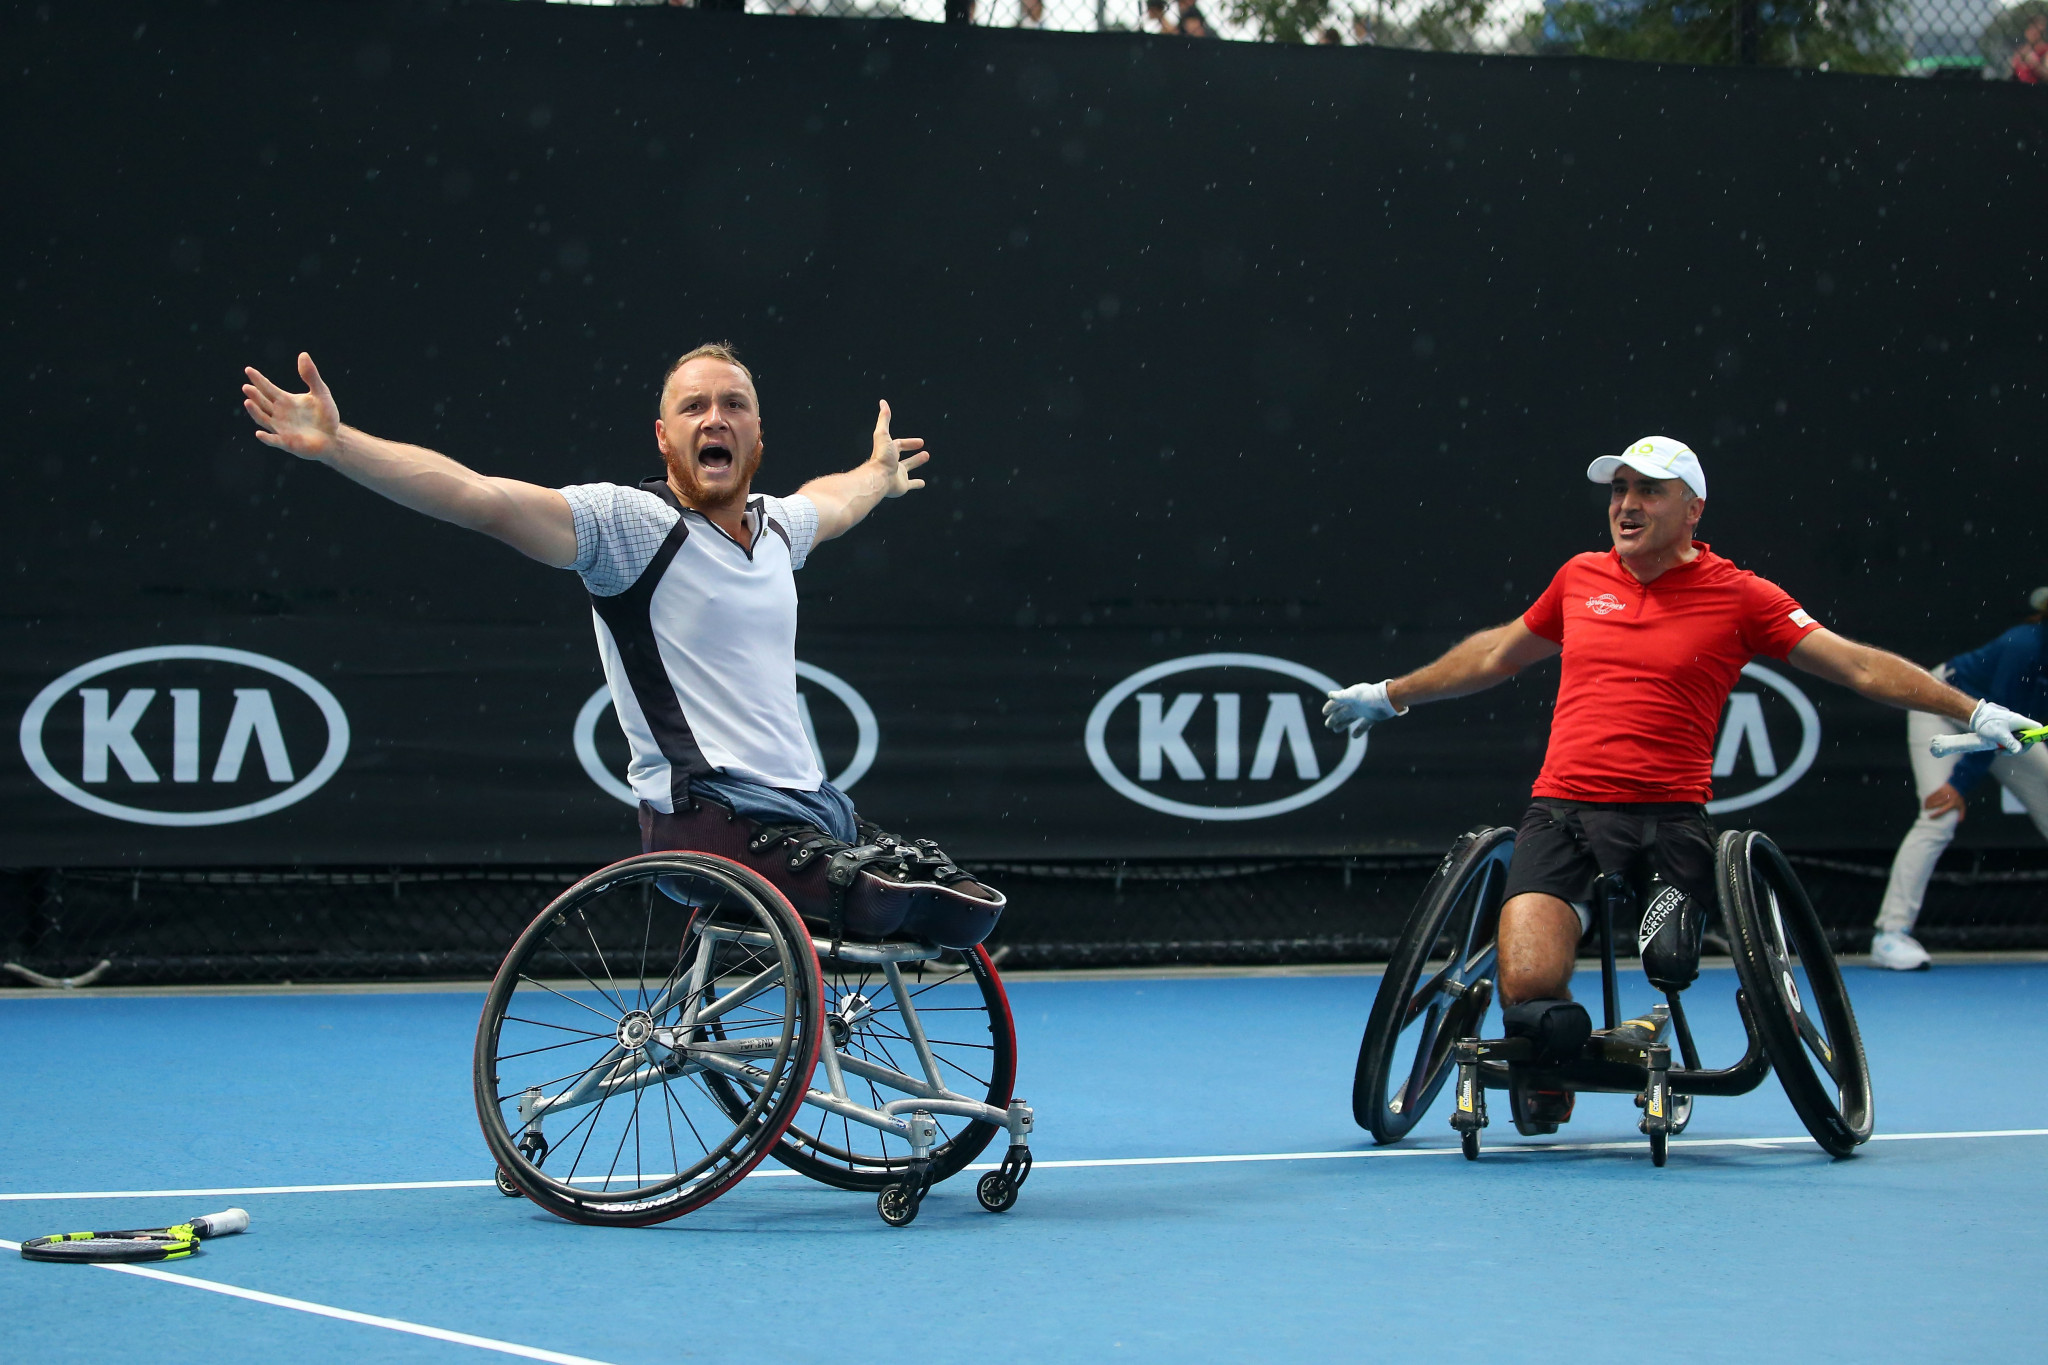 Houdet and Peifer secure men's wheelchair doubles crown at Australian Open